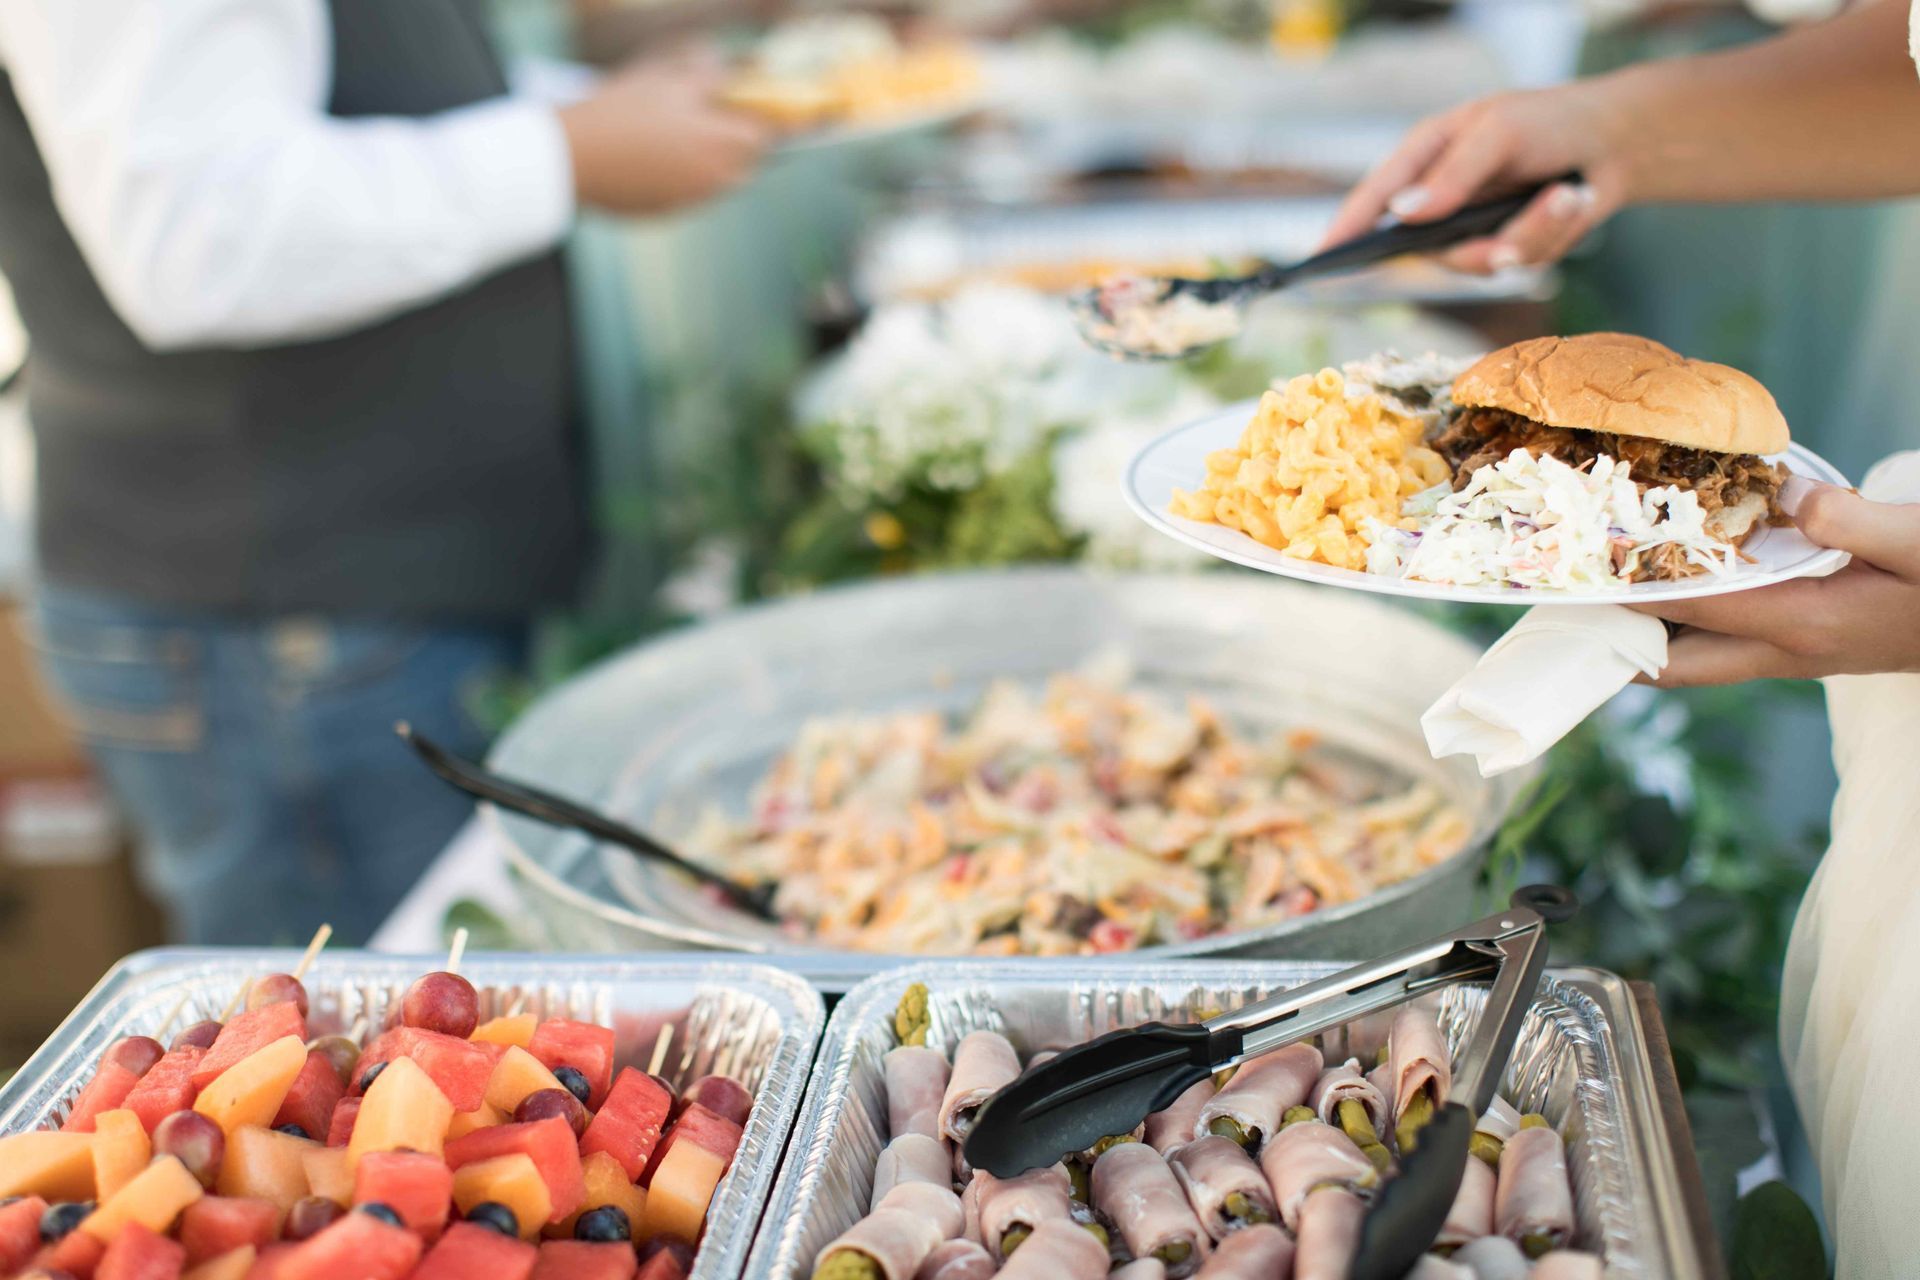 A buffet of food being served from an outdoor kitchen